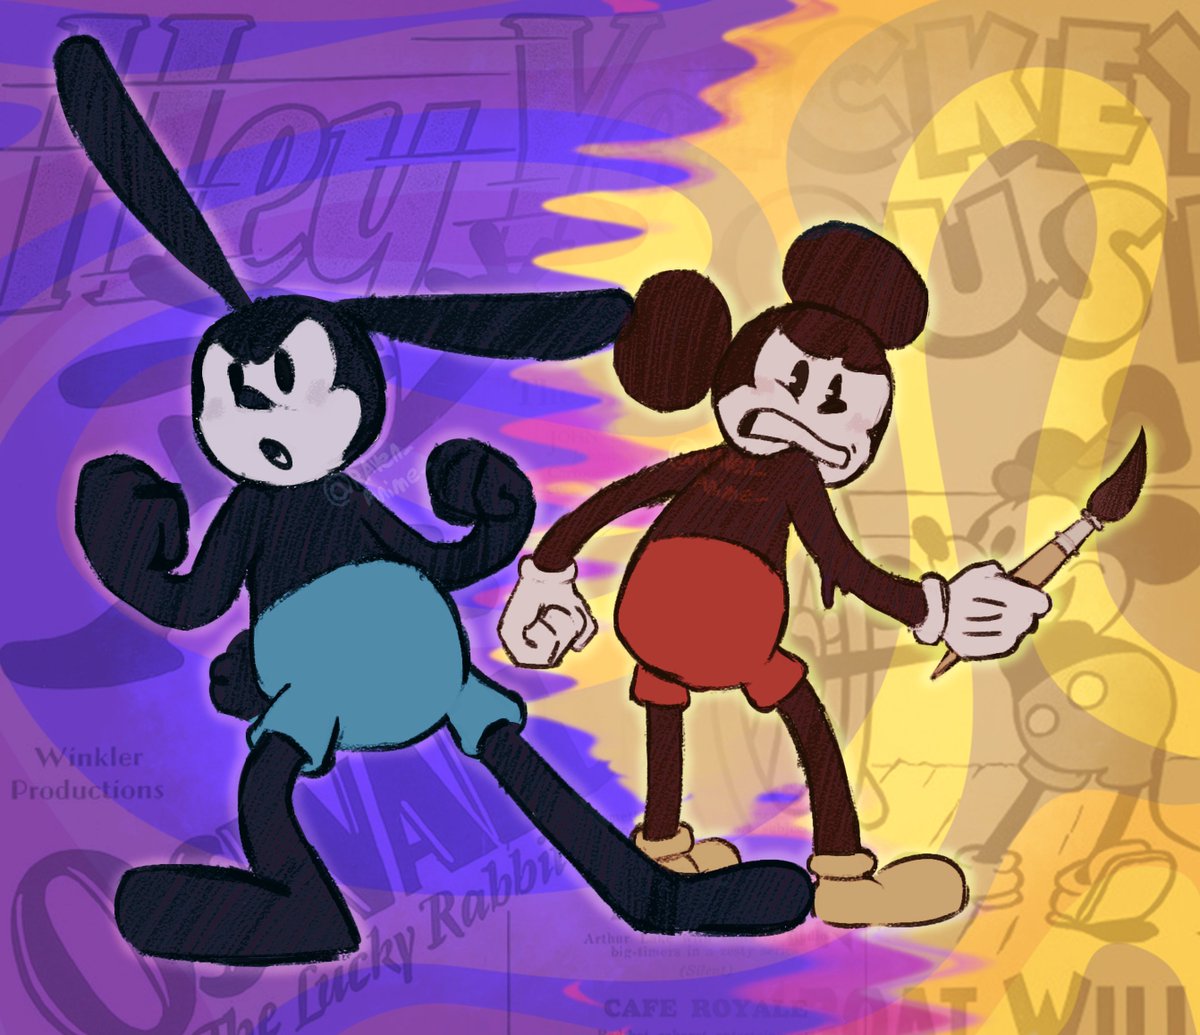 THE SILLY ARE BACK!!!!
#EpicMickey #EpicMickeyRebrushed #Oswaldtheluckyrabbit #mickeymouse #mickey